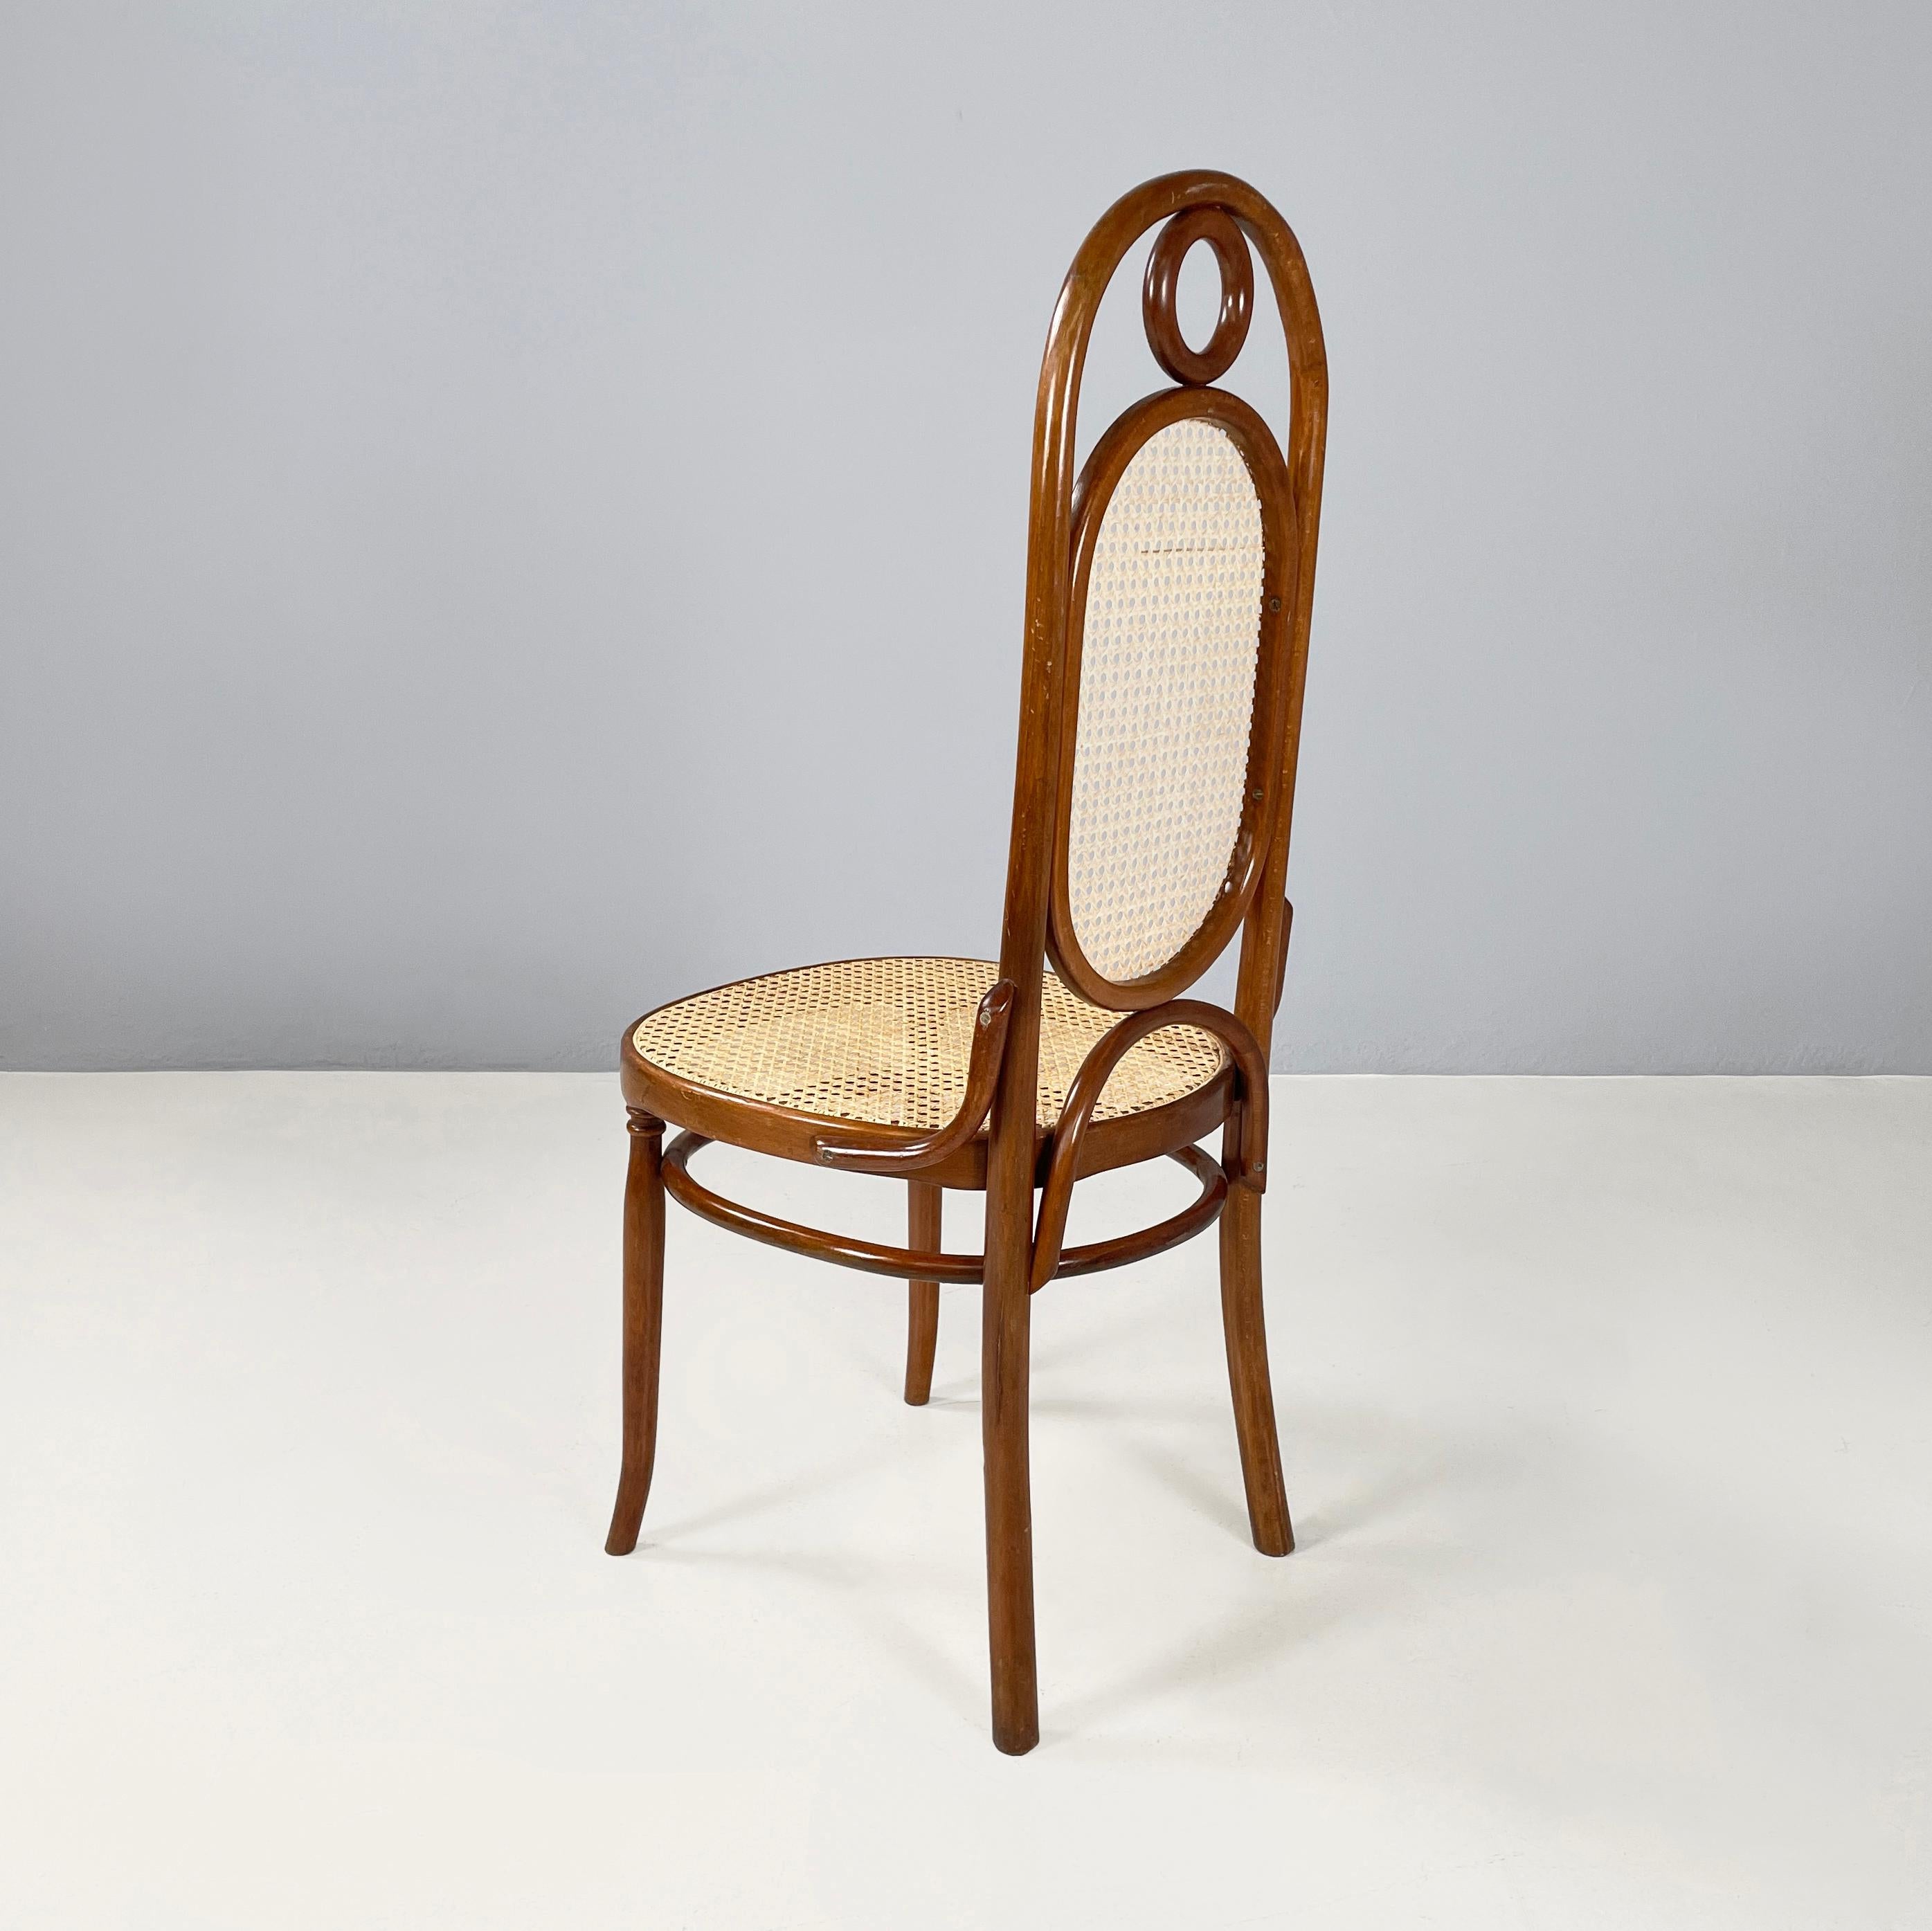 20th Century Italian Chair in straw and wood, 1900-1950s For Sale